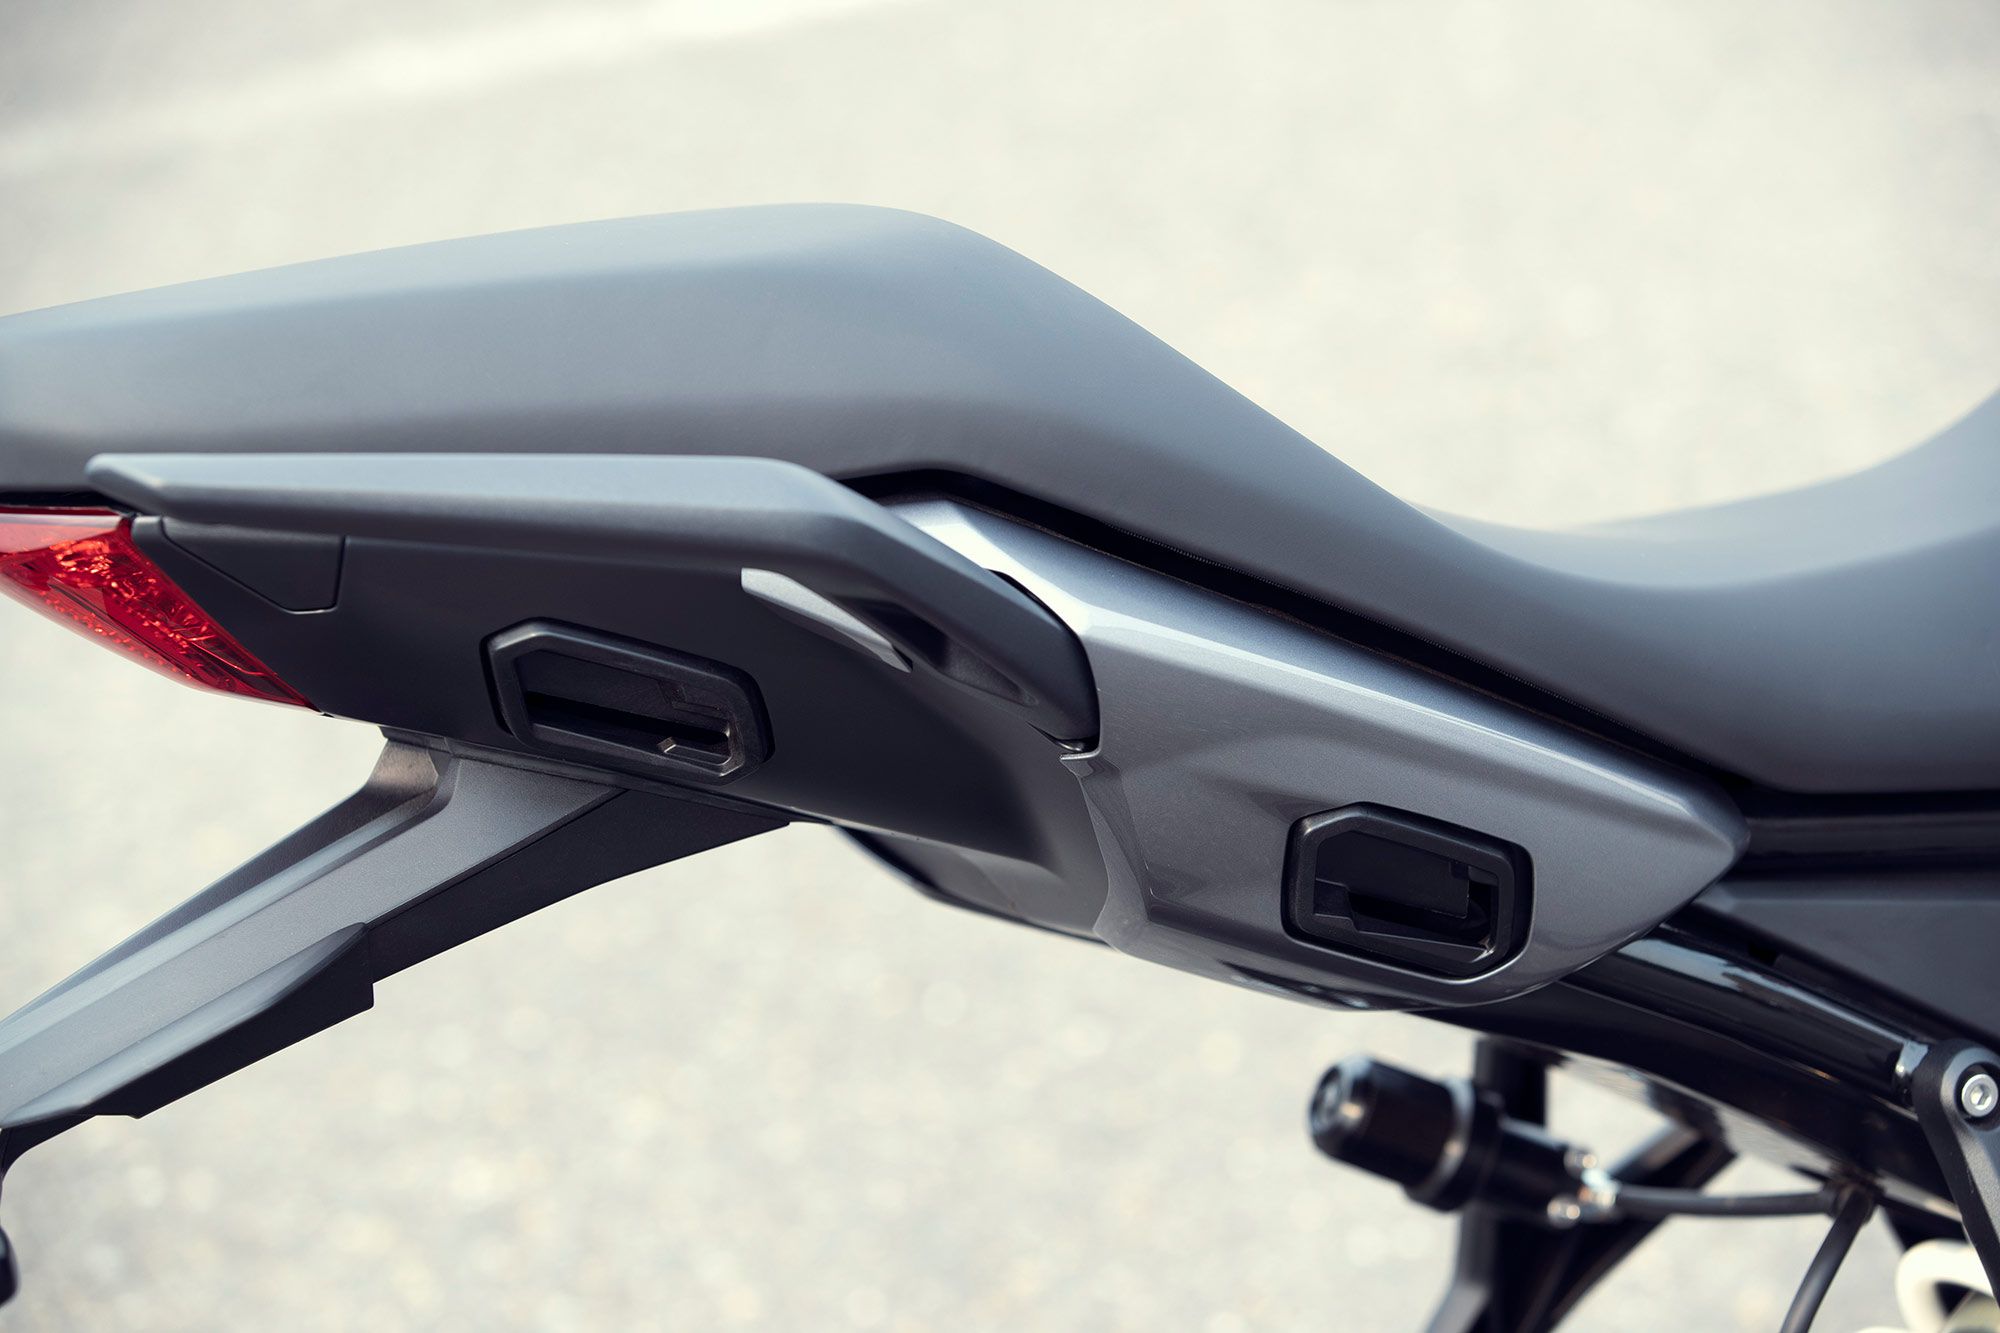 The Tigers two-up seating is comfortable with a relatively easy seat height of 32.9 inches for the pilot and integrated pillion grab handles fitted as standard on both sides.